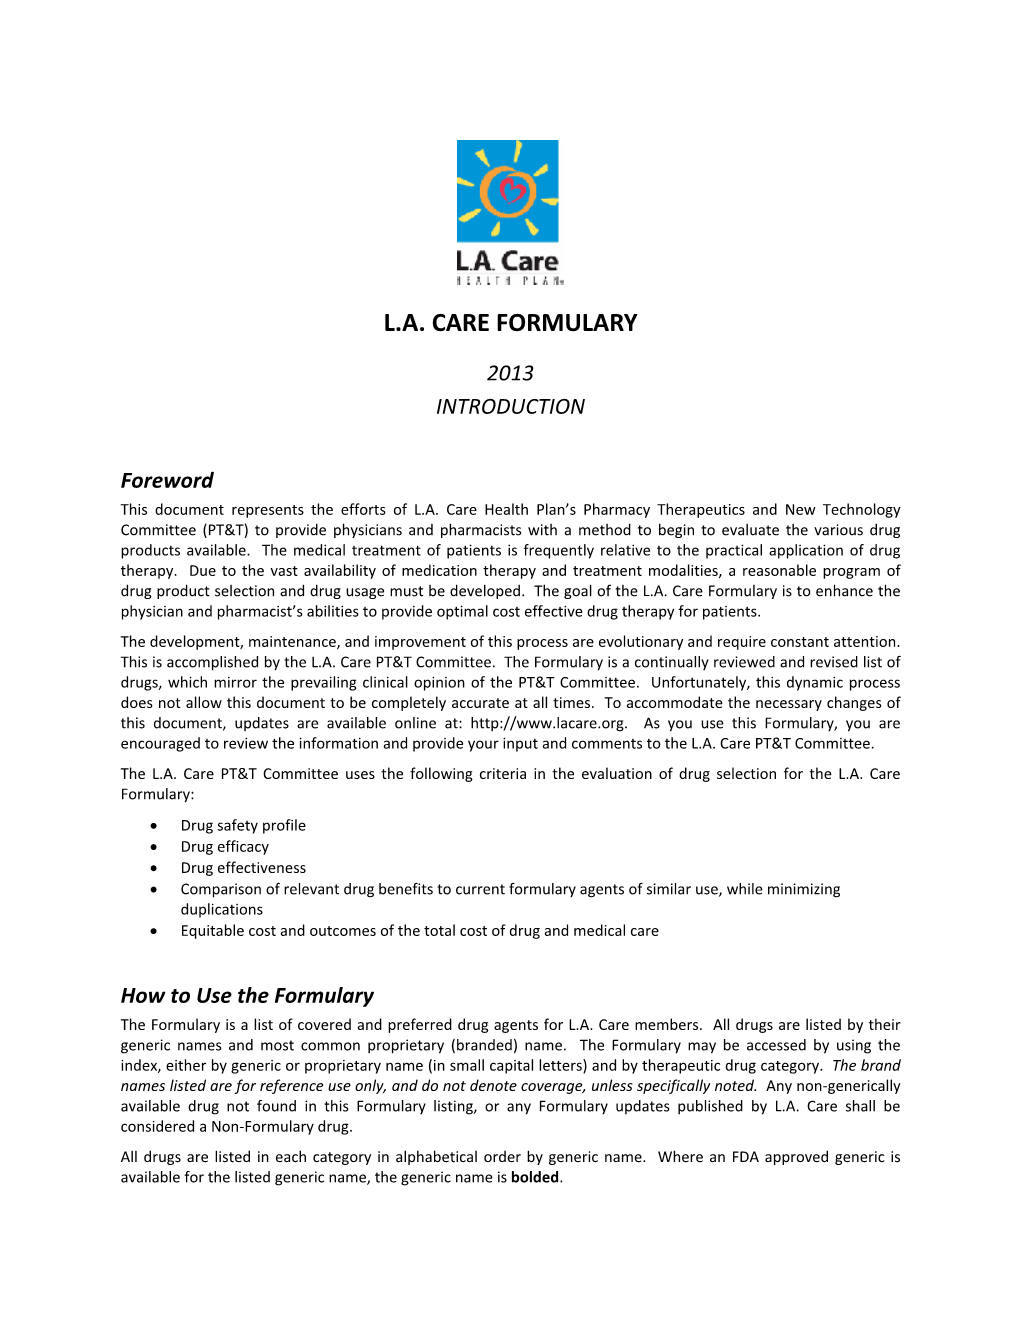 L.A. Care Formulary